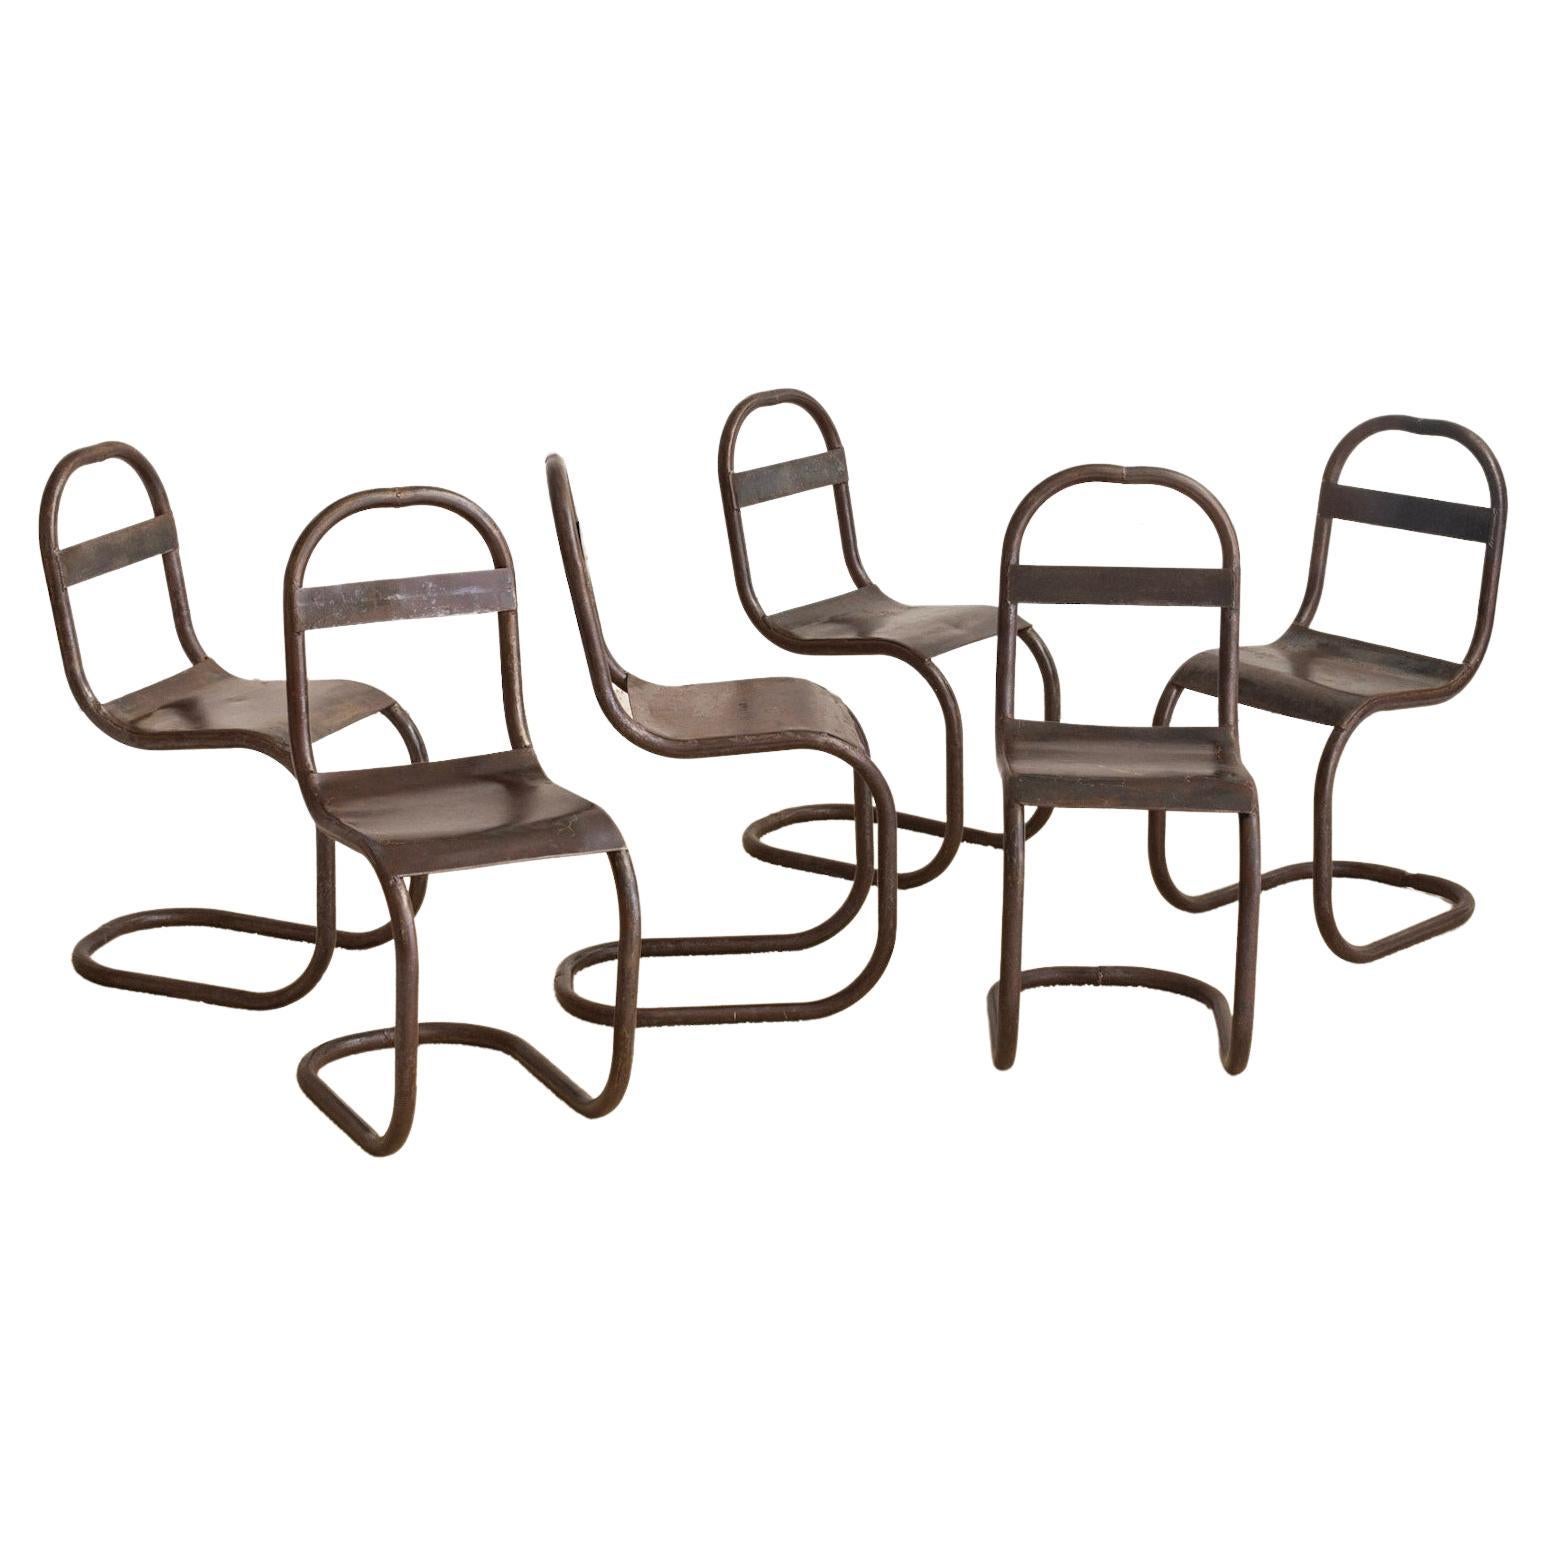 Studio Made Industrial Cantilever Dining Chairs, Set of 6